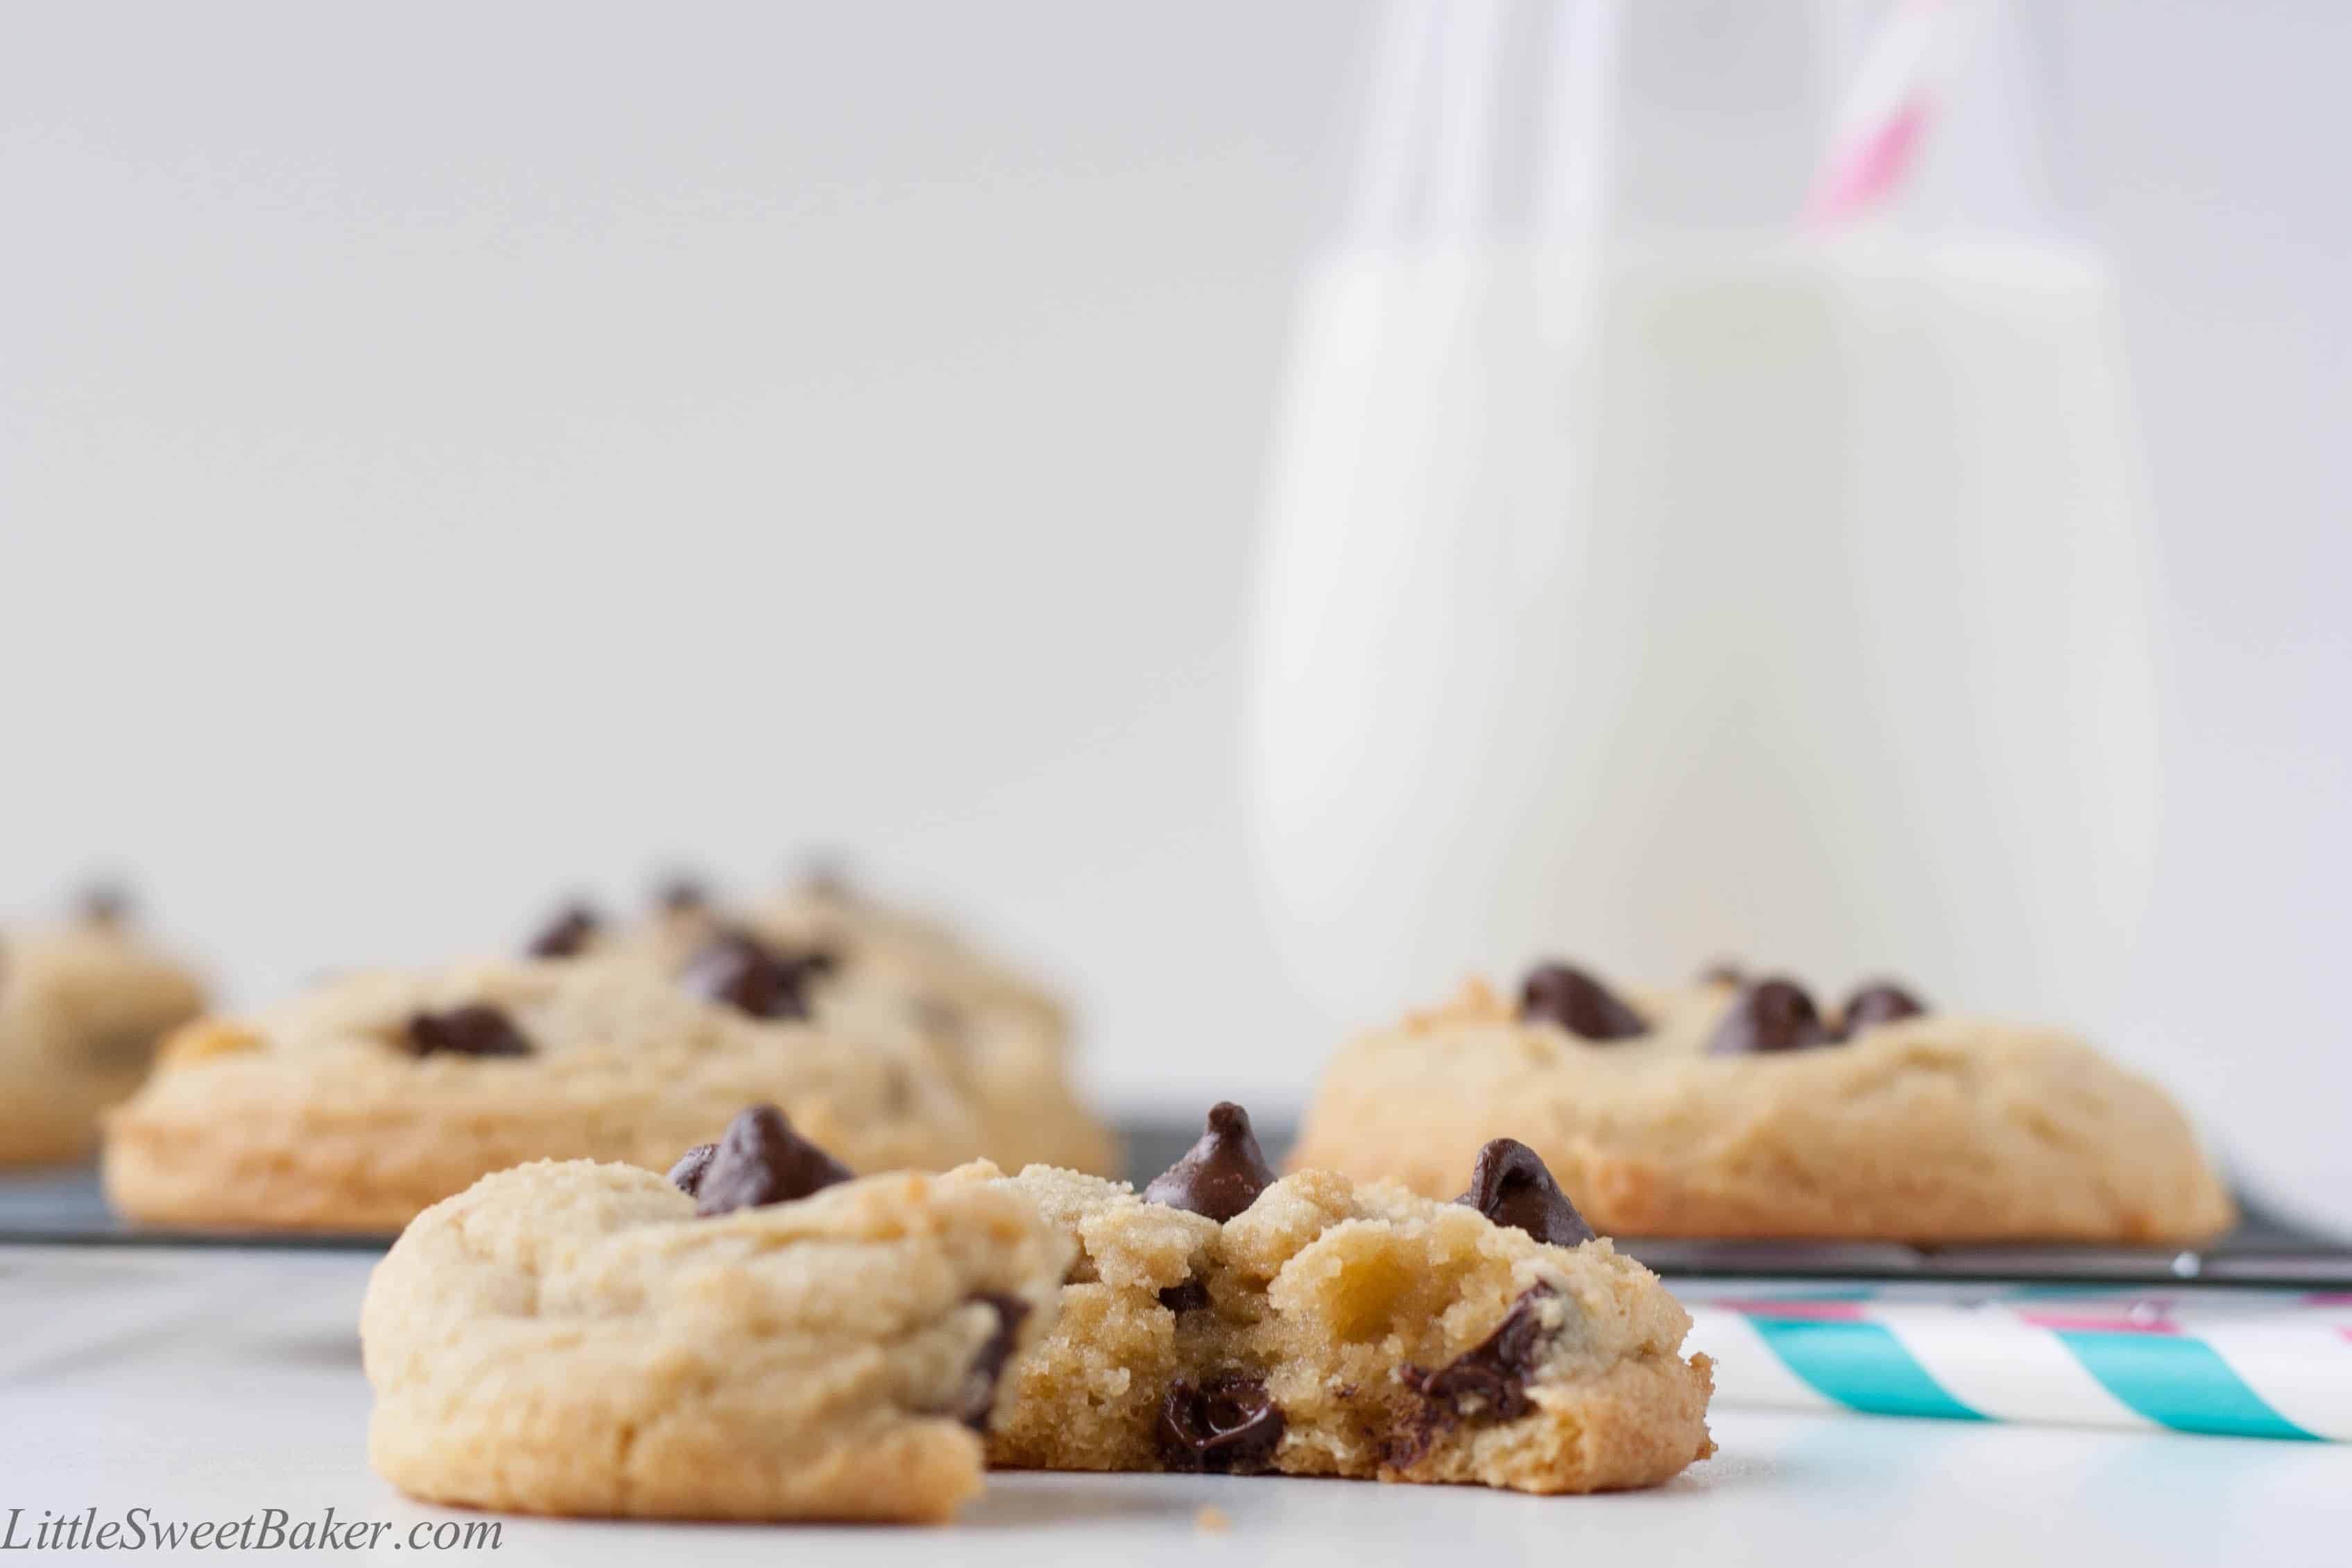 The best chocolate chip cookie recipe. Crispy around the edges, soft and chewy in the centre and loaded with chocolate chips.